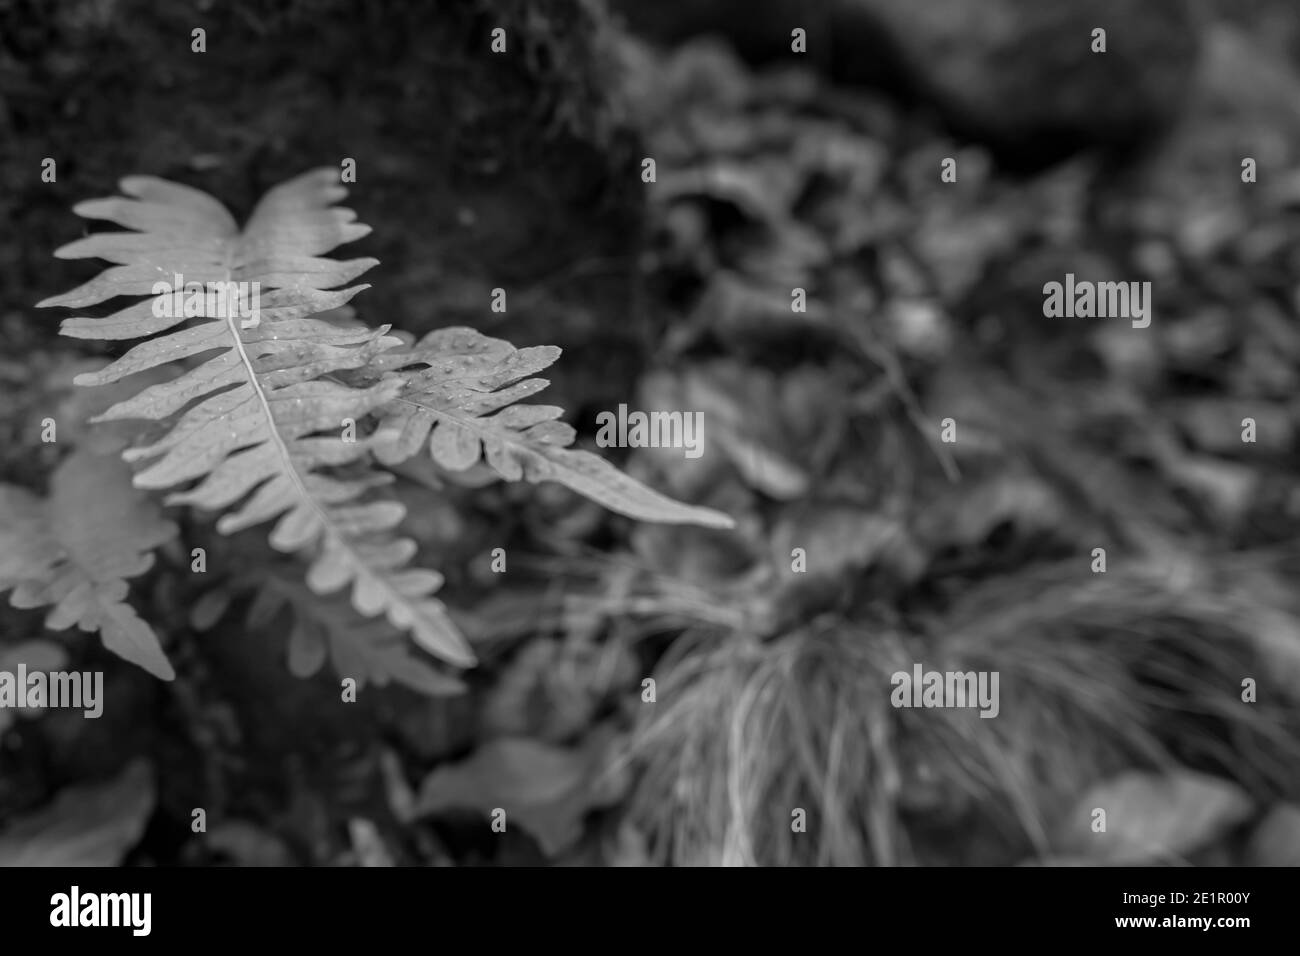 Pteridium aquilinum or eagle fern.Nature plant background.Fashion design concept. Black and white photography style.Copy space for text Stock Photo